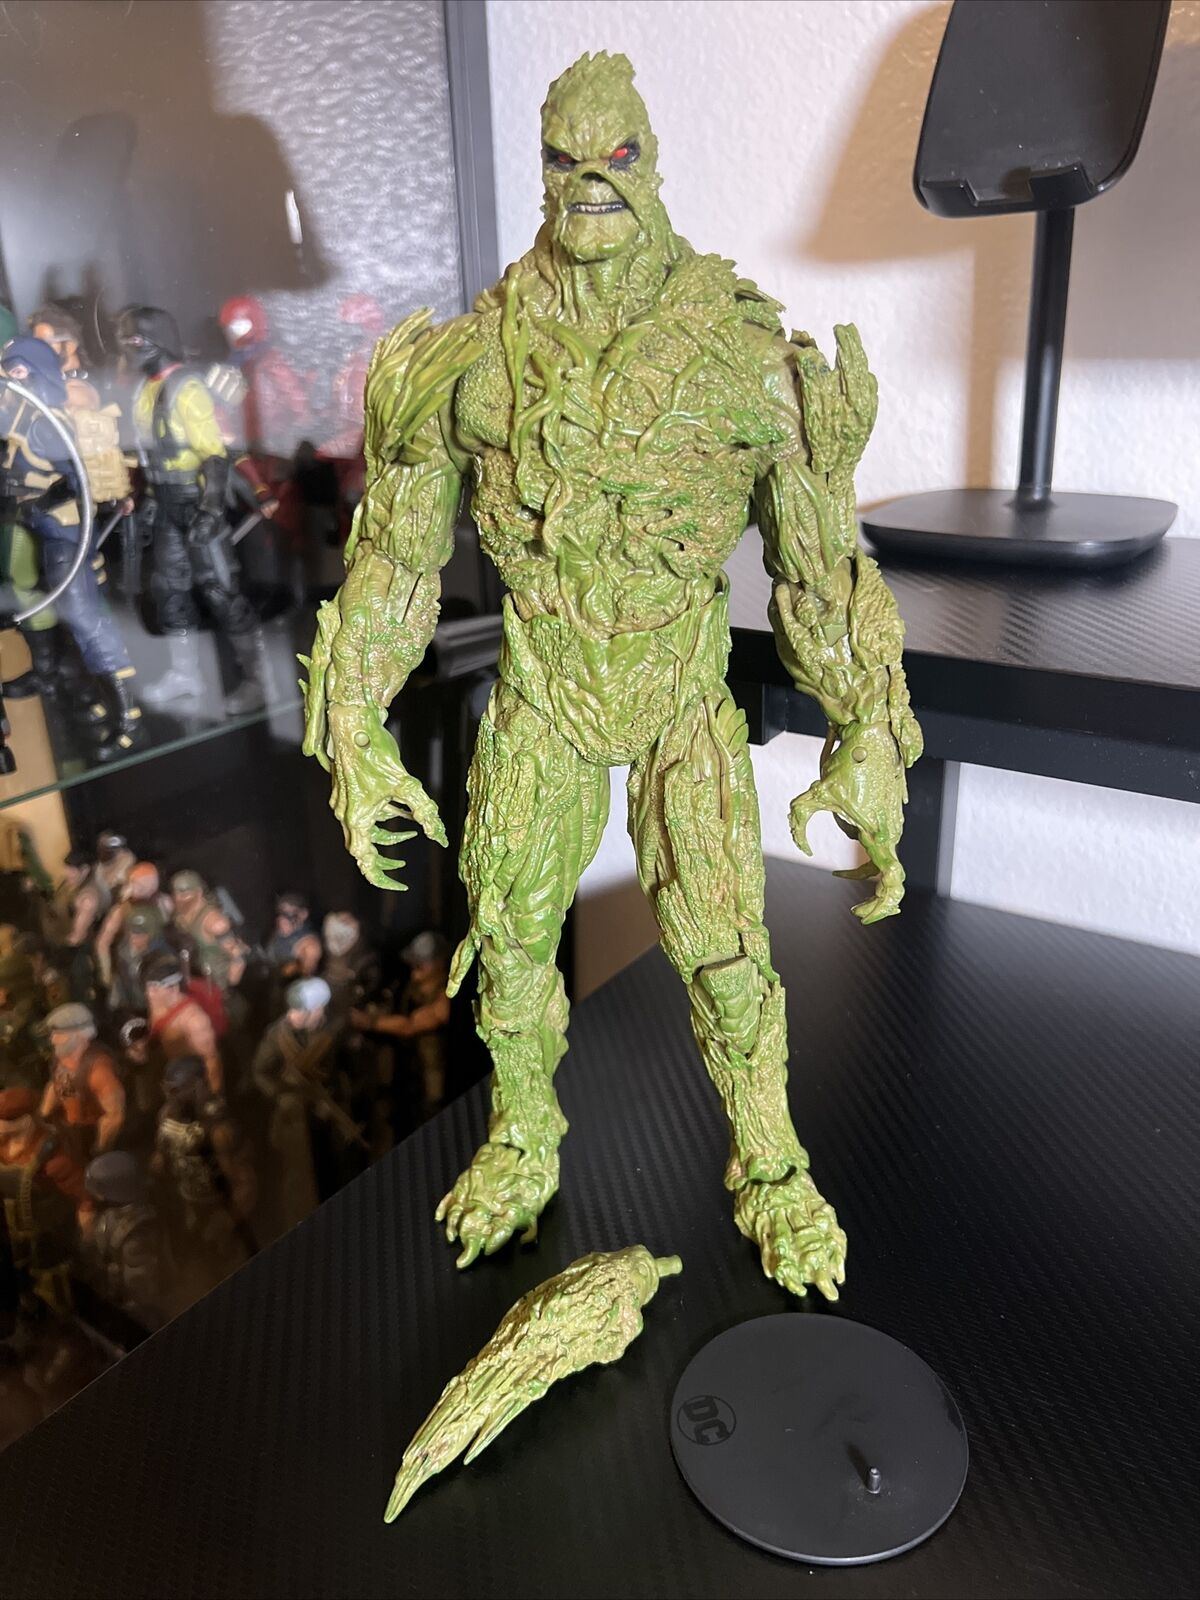 DC Multiverse Swamp Thing Mega Action Figure with Accessories